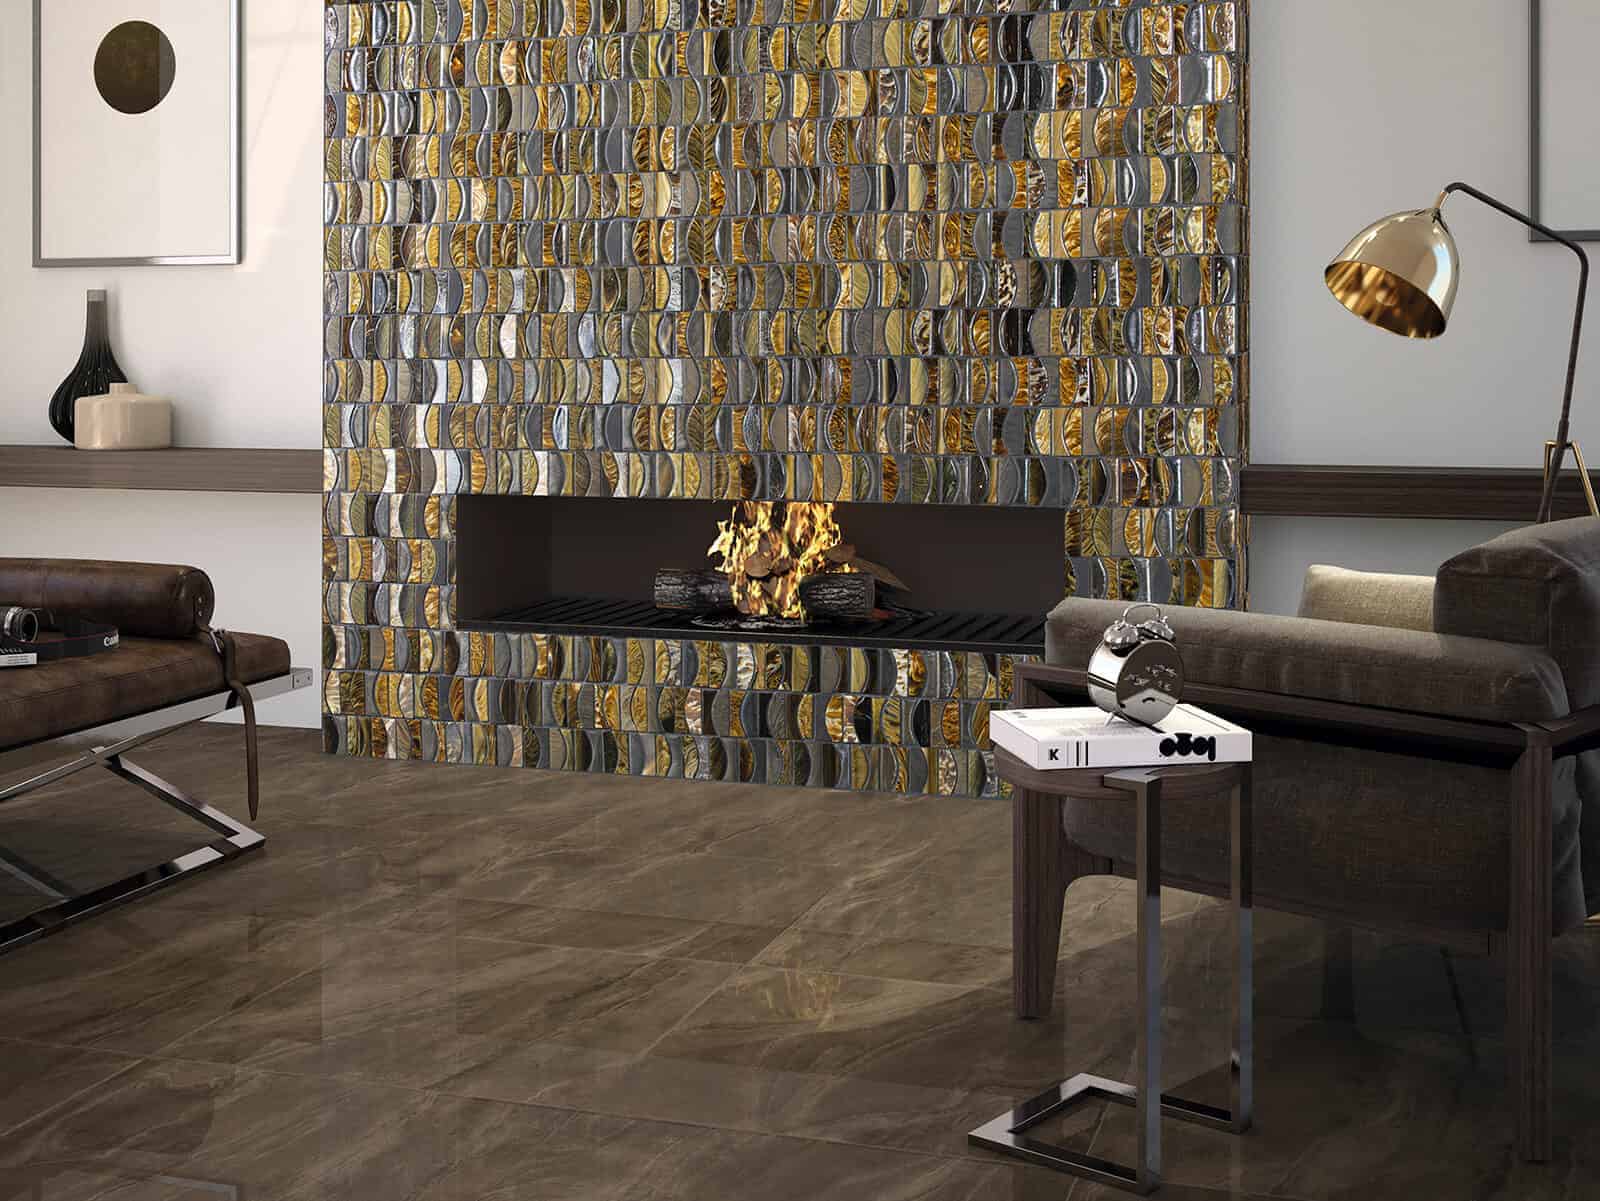 metallic wall tiles in brown and golden colour